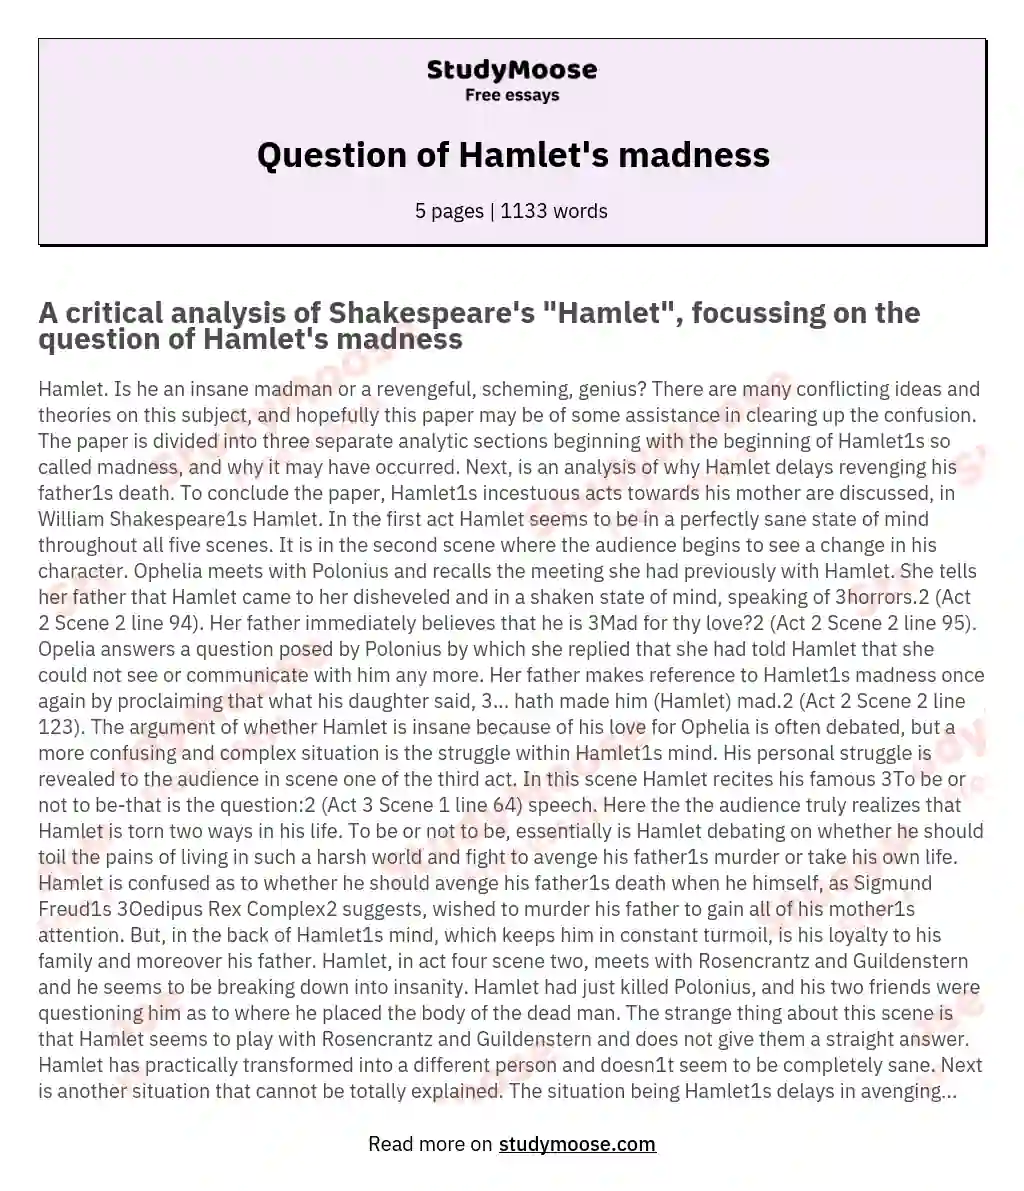 Question of Hamlet's madness